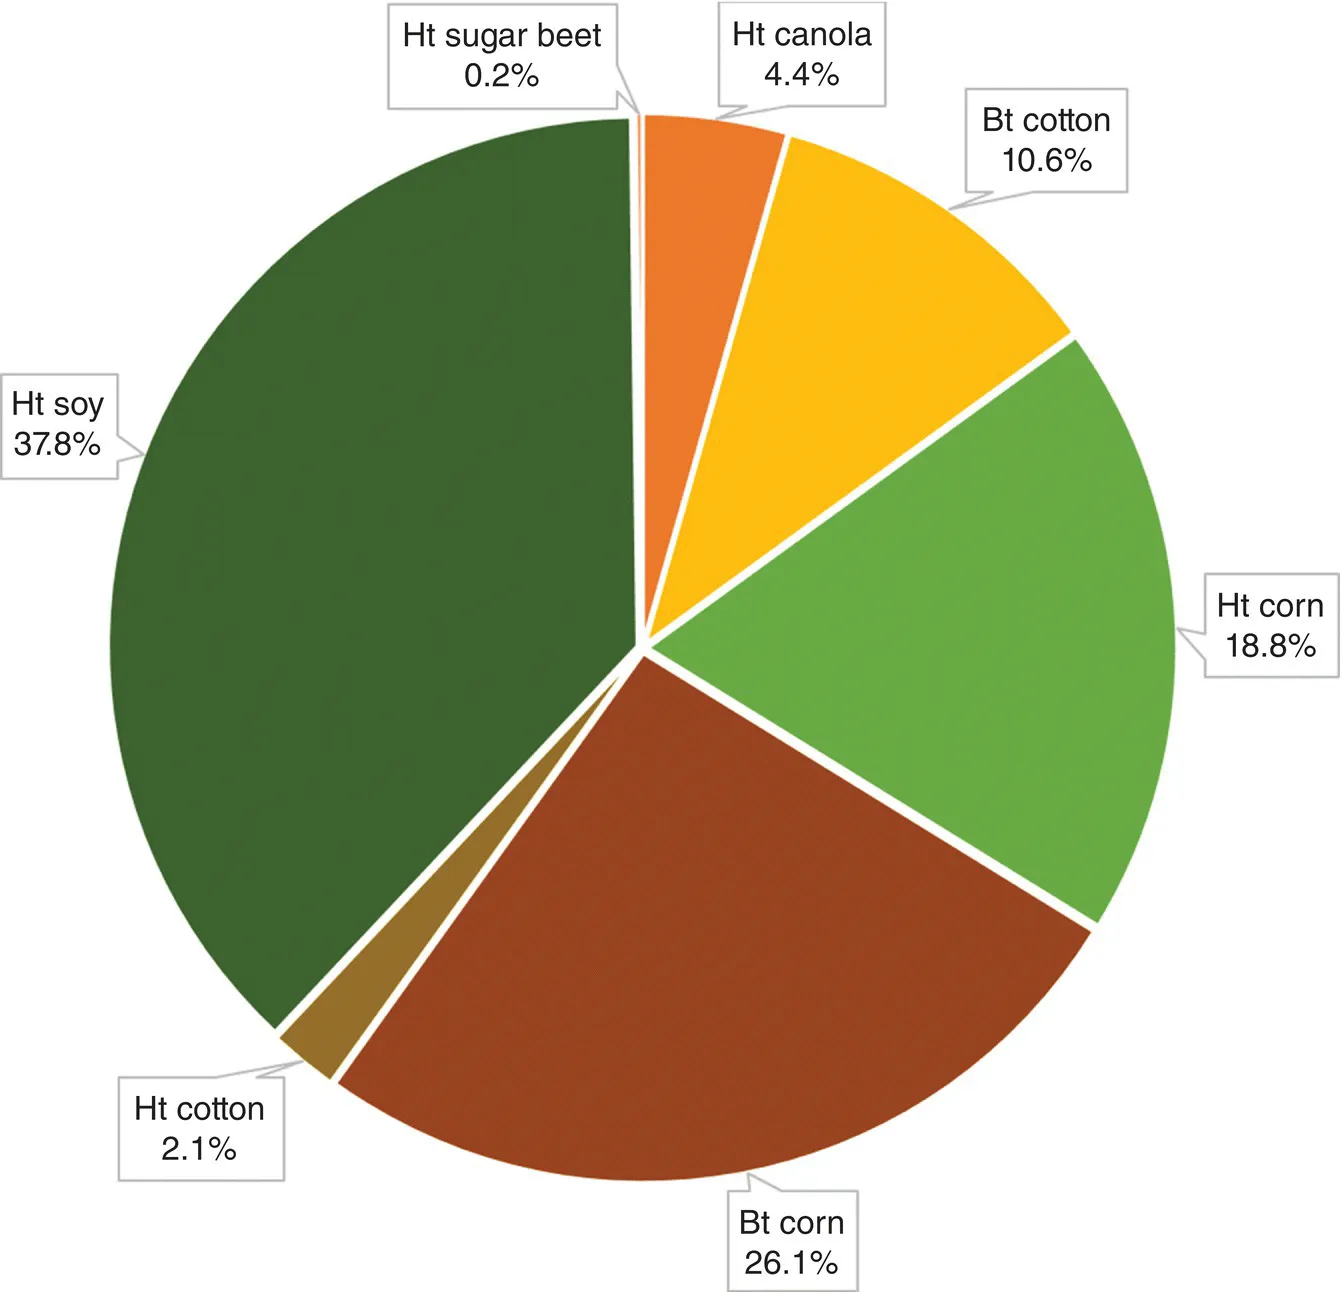 Pie graph of the global GM crop plantings by main trait and crop displaying Ht soy 37.8%, Ht sugar beet 0.2%, Ht canola 4.4%, Bt cotton 10.6%, Ht corn 18.8%, Bt corn 26.1%, and Ht cotton 2.1%.